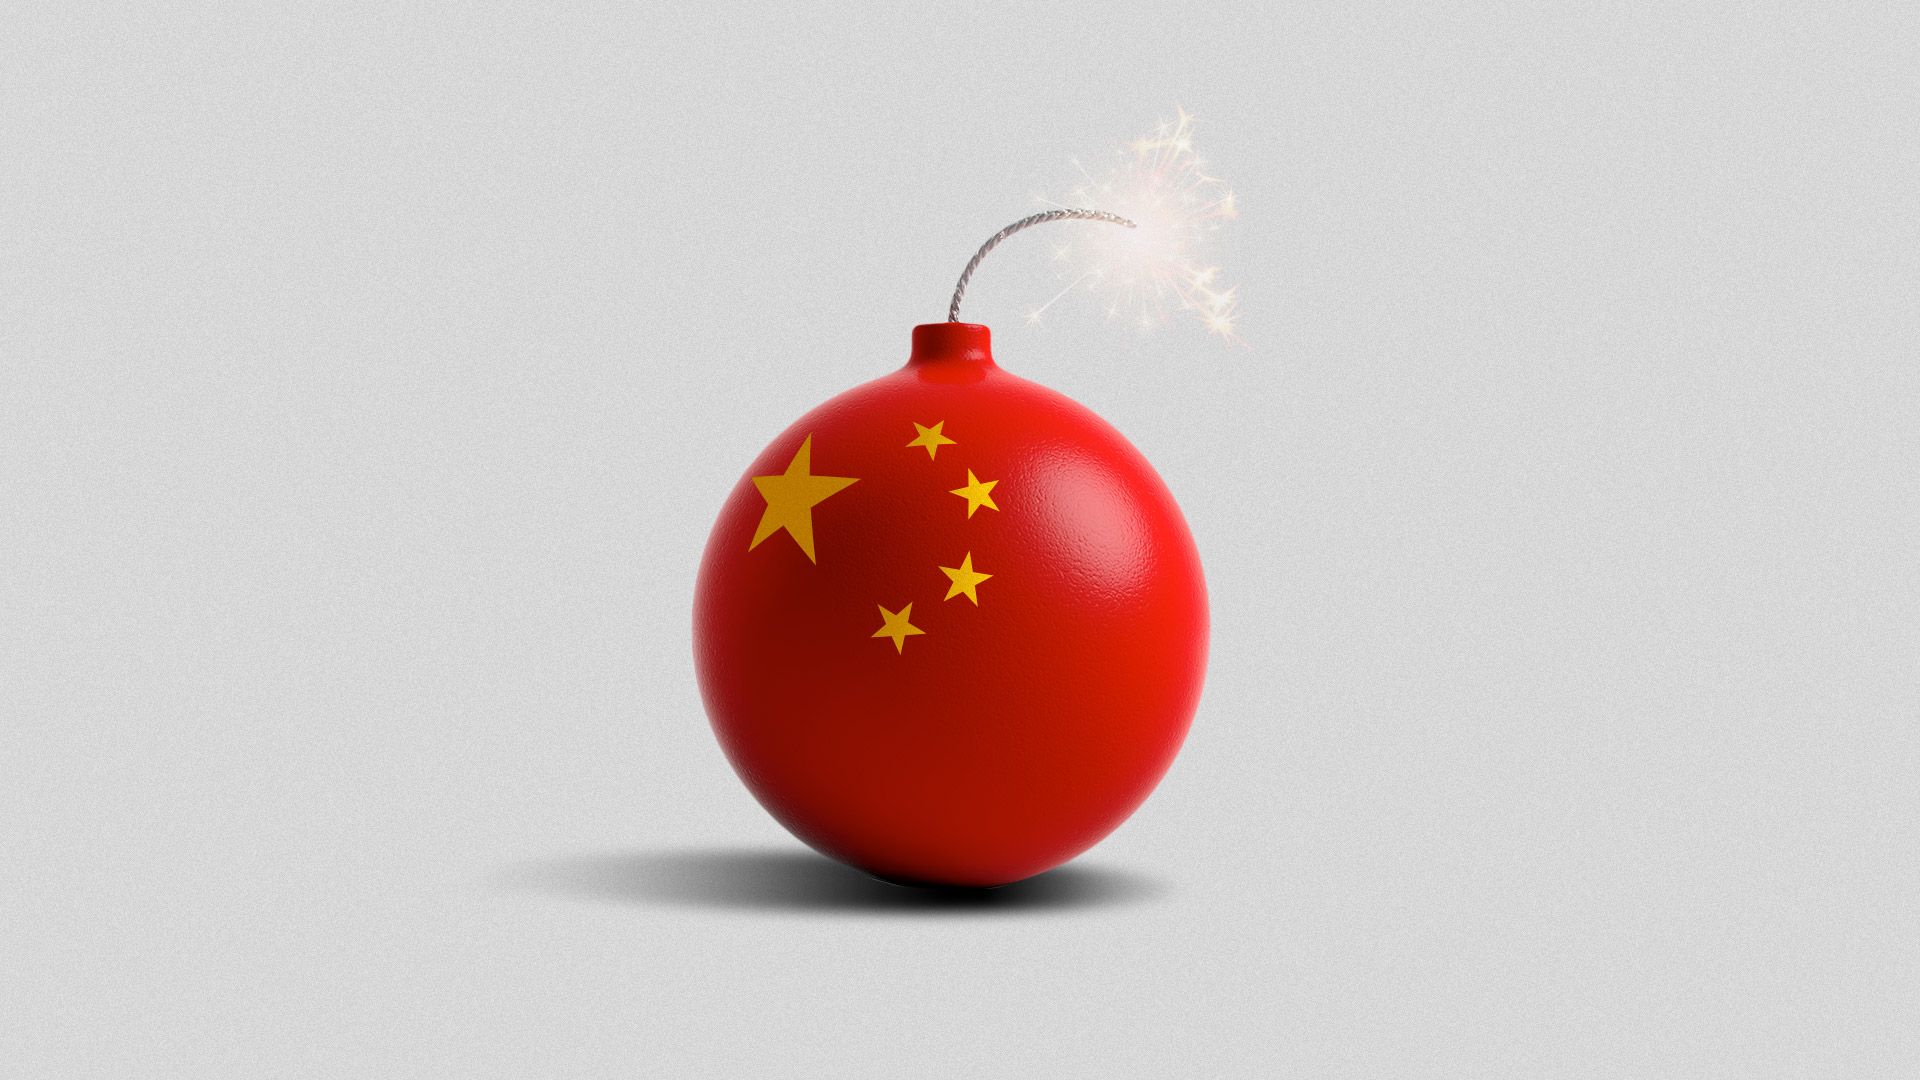 Illustration of a lit round bomb with Chinese stars on it